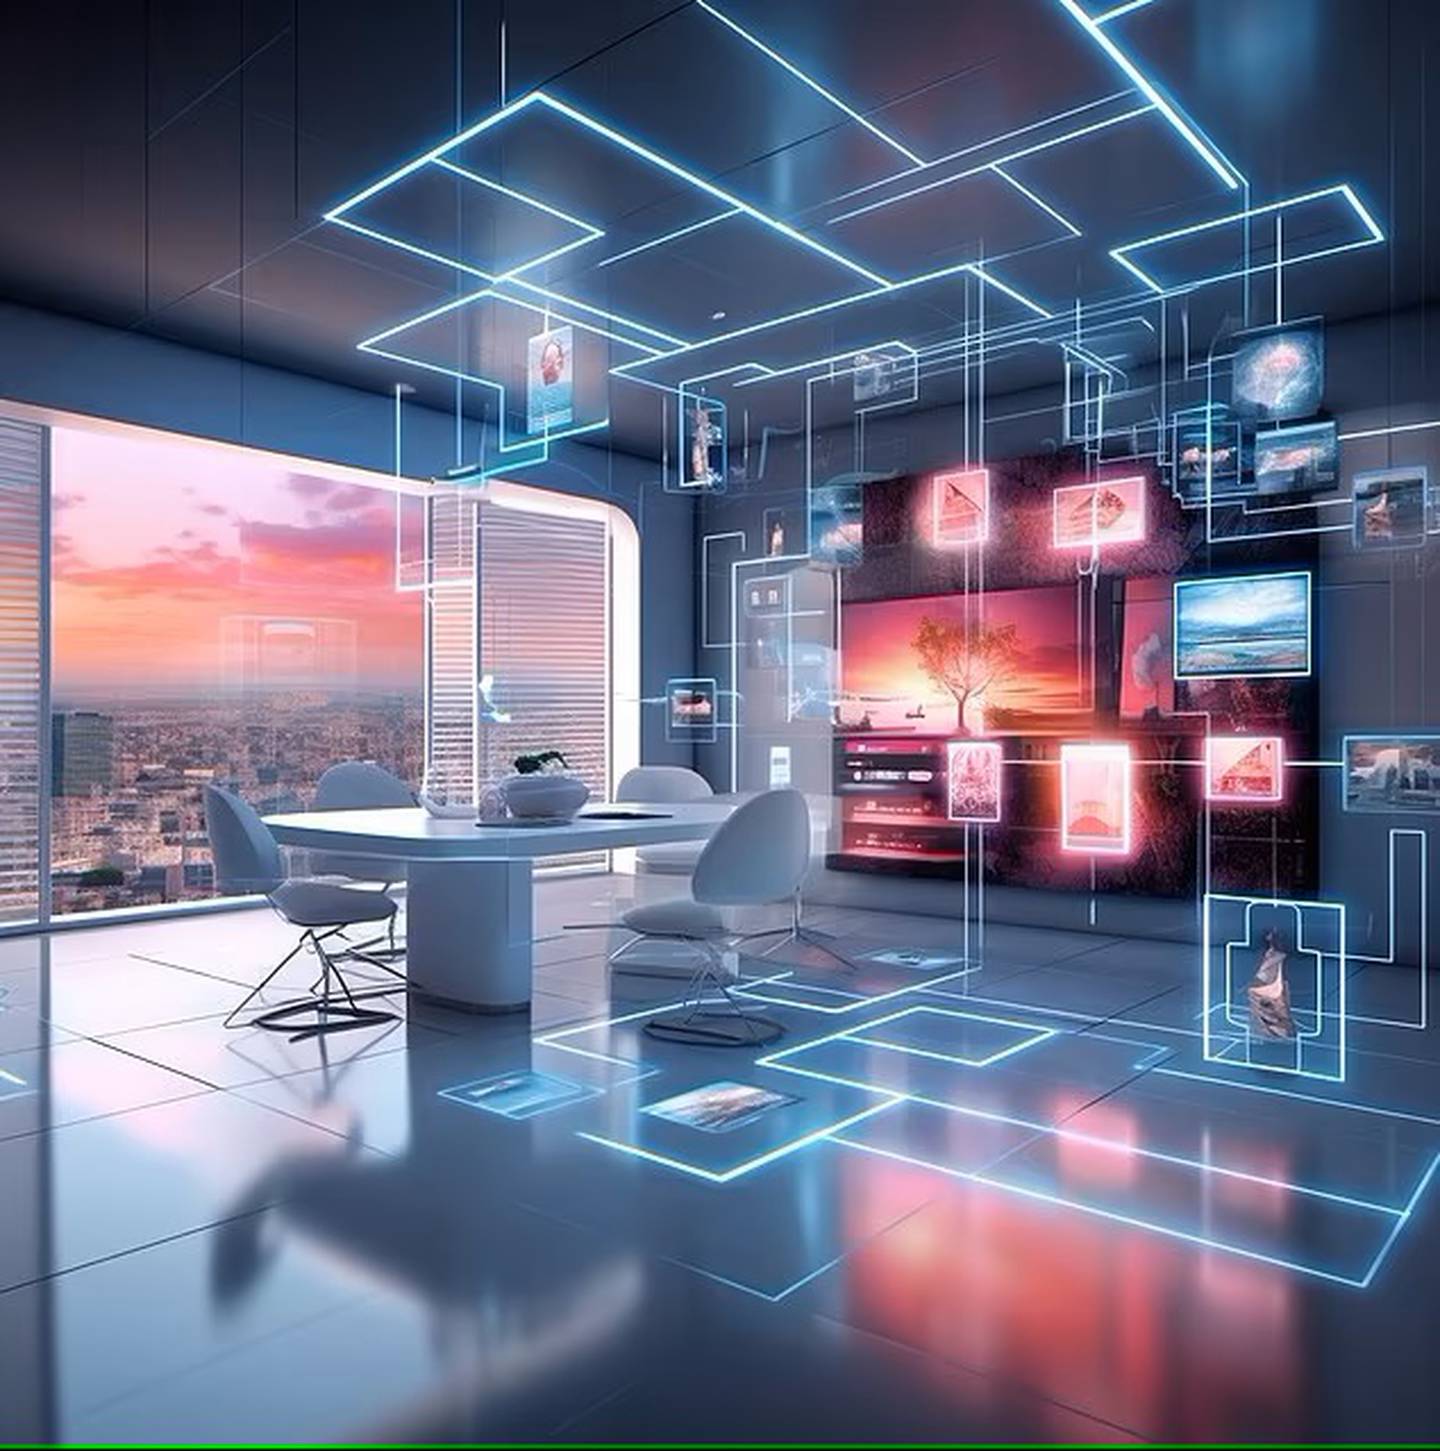 This is what the houses of the future will look like